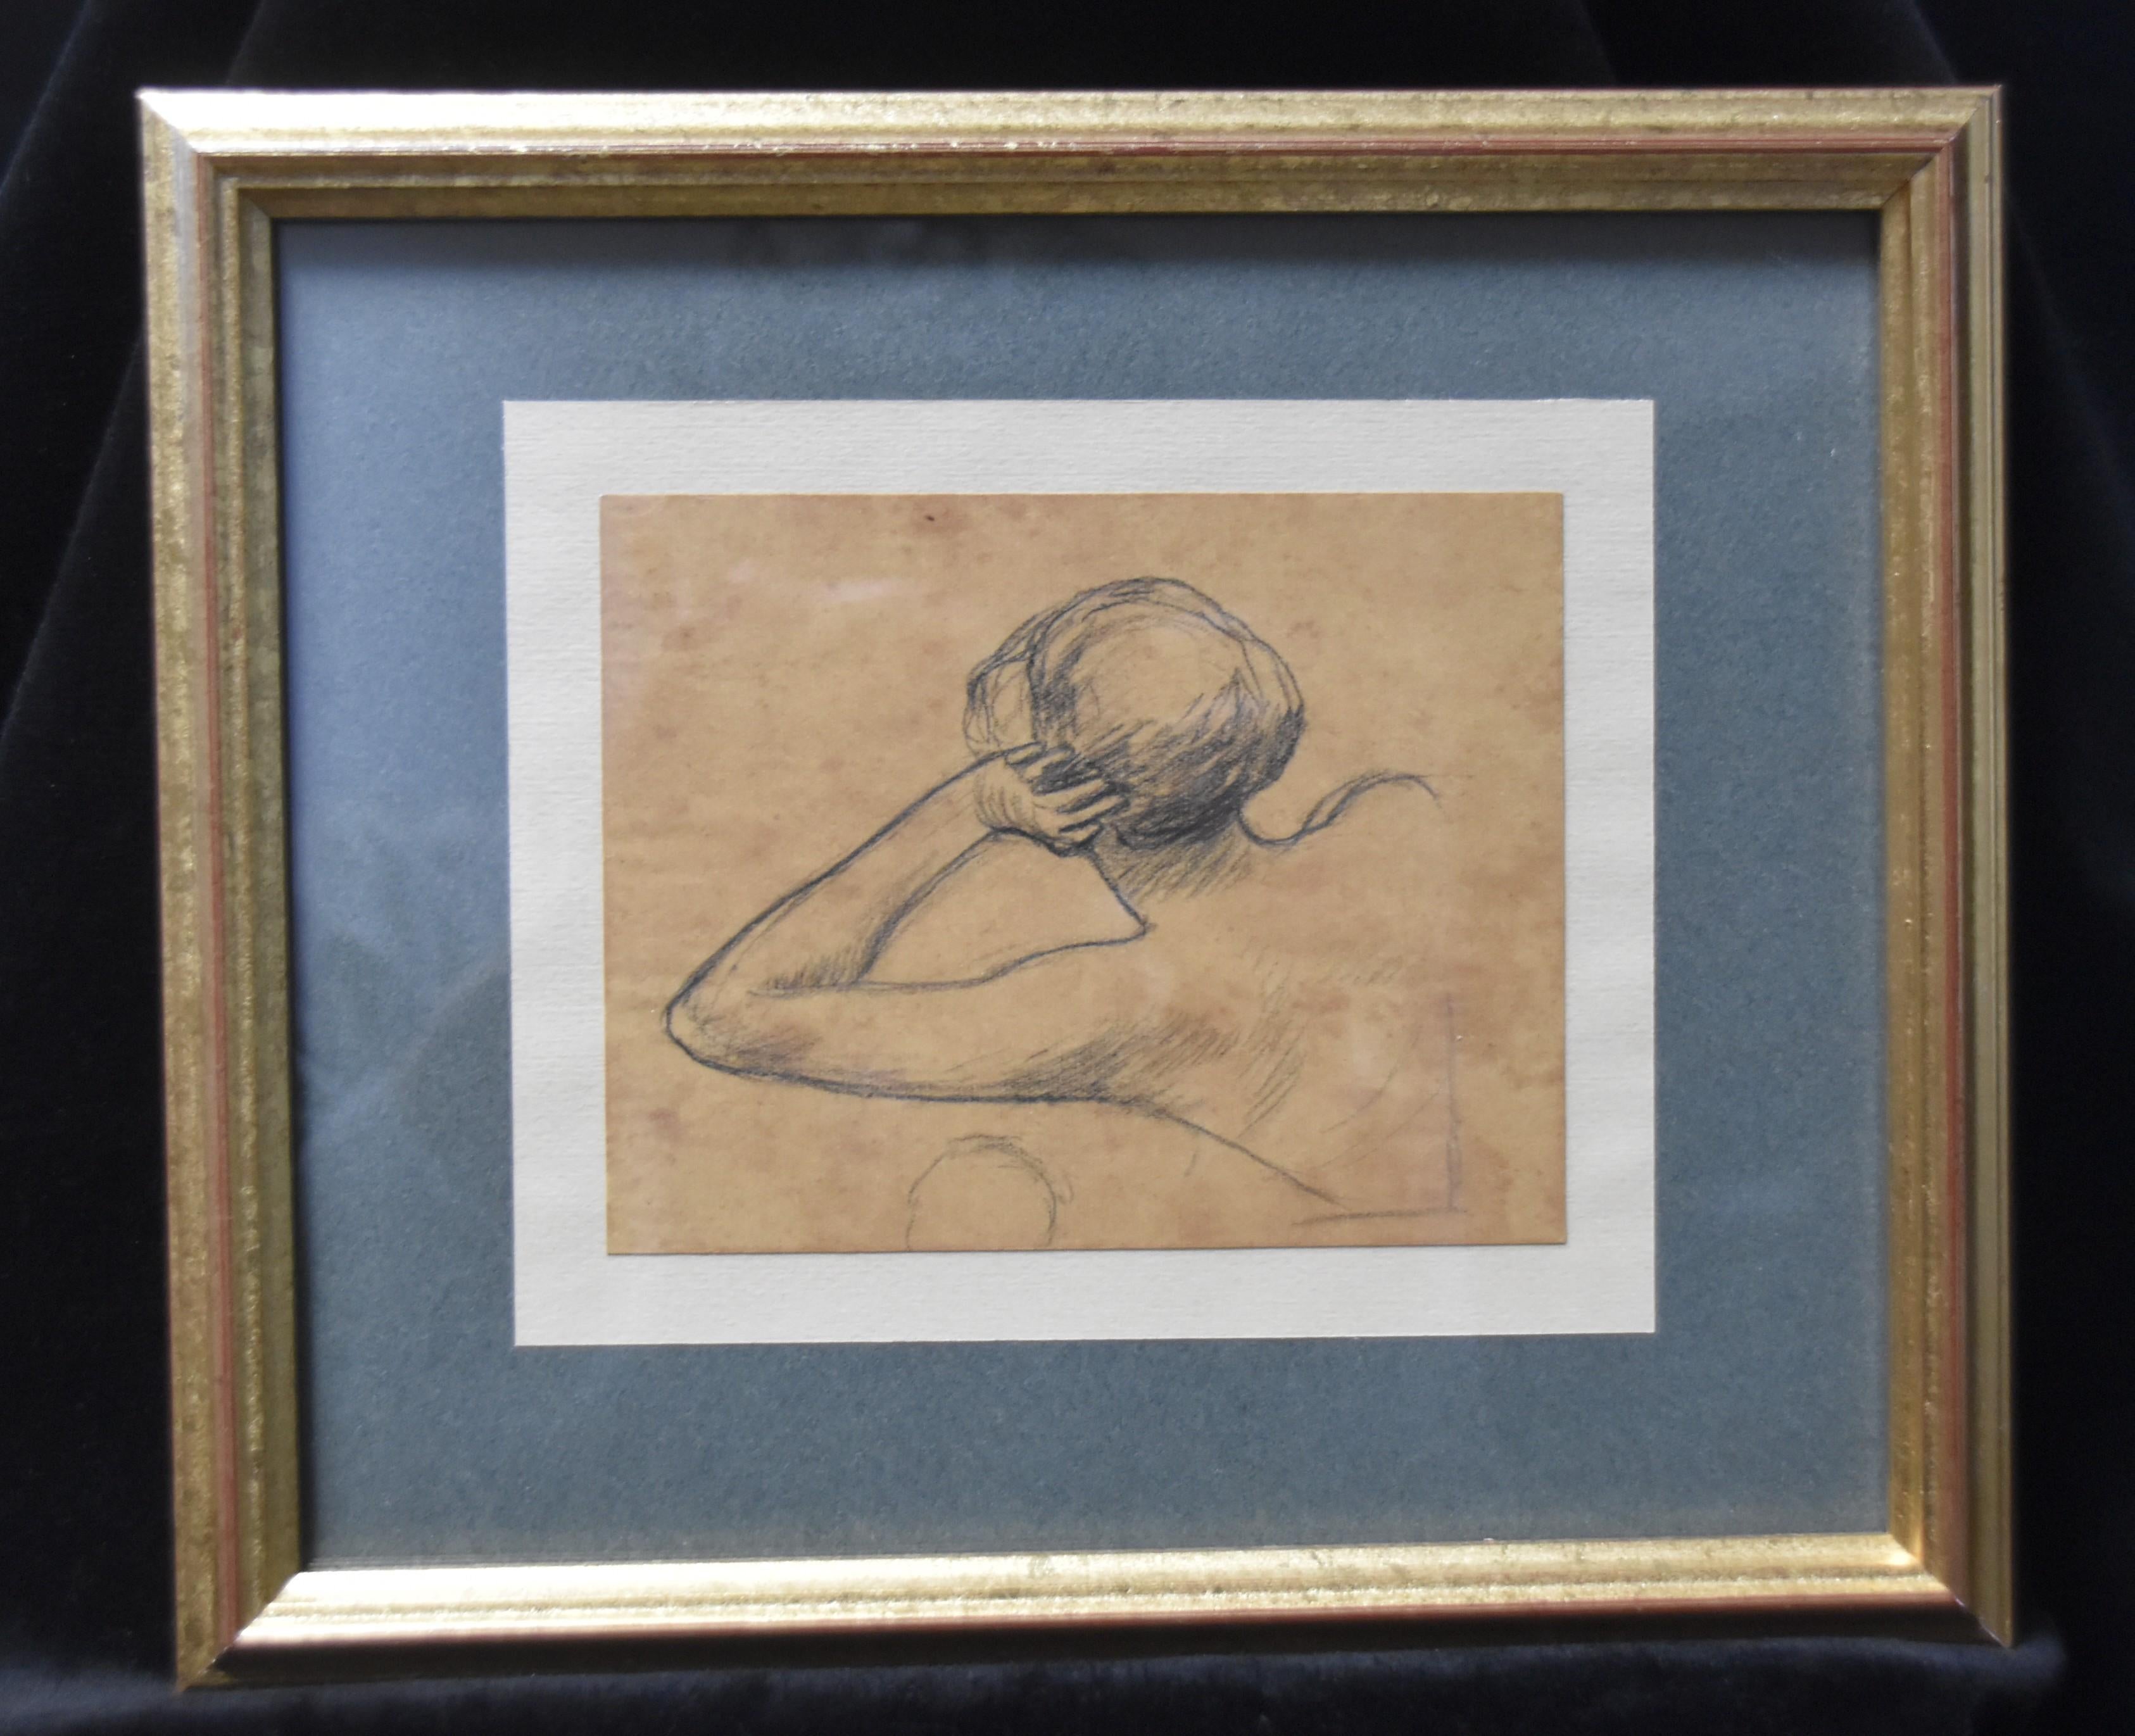 Georges Antoine Rochegrosse  (1859-1938) 
A woman resting on her arm seen from behind, study
pencil on thin paper
10.5 x 13 cm
stains and foxings as visible on the pictures
Framed : 22 x 25.5 cm
Provenance: Estate of the artist and by Inheritance to